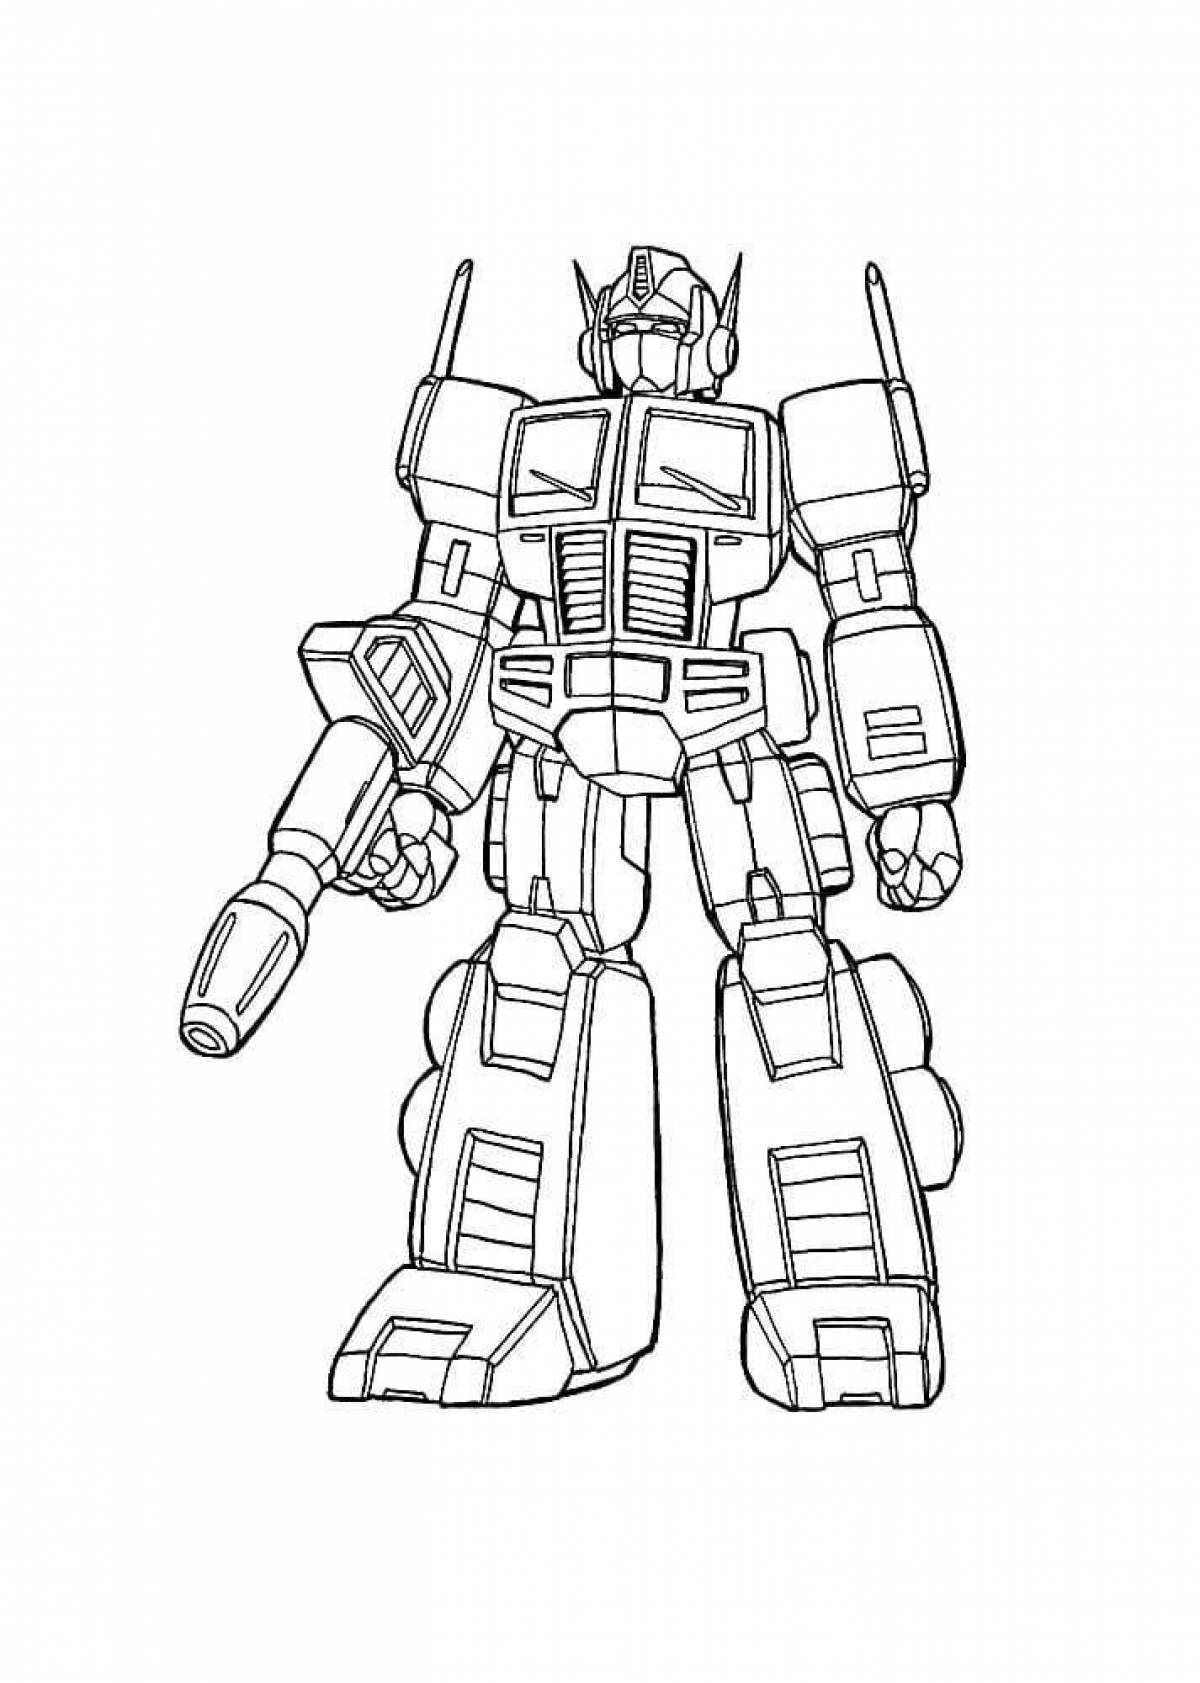 Awesome optimus coloring page